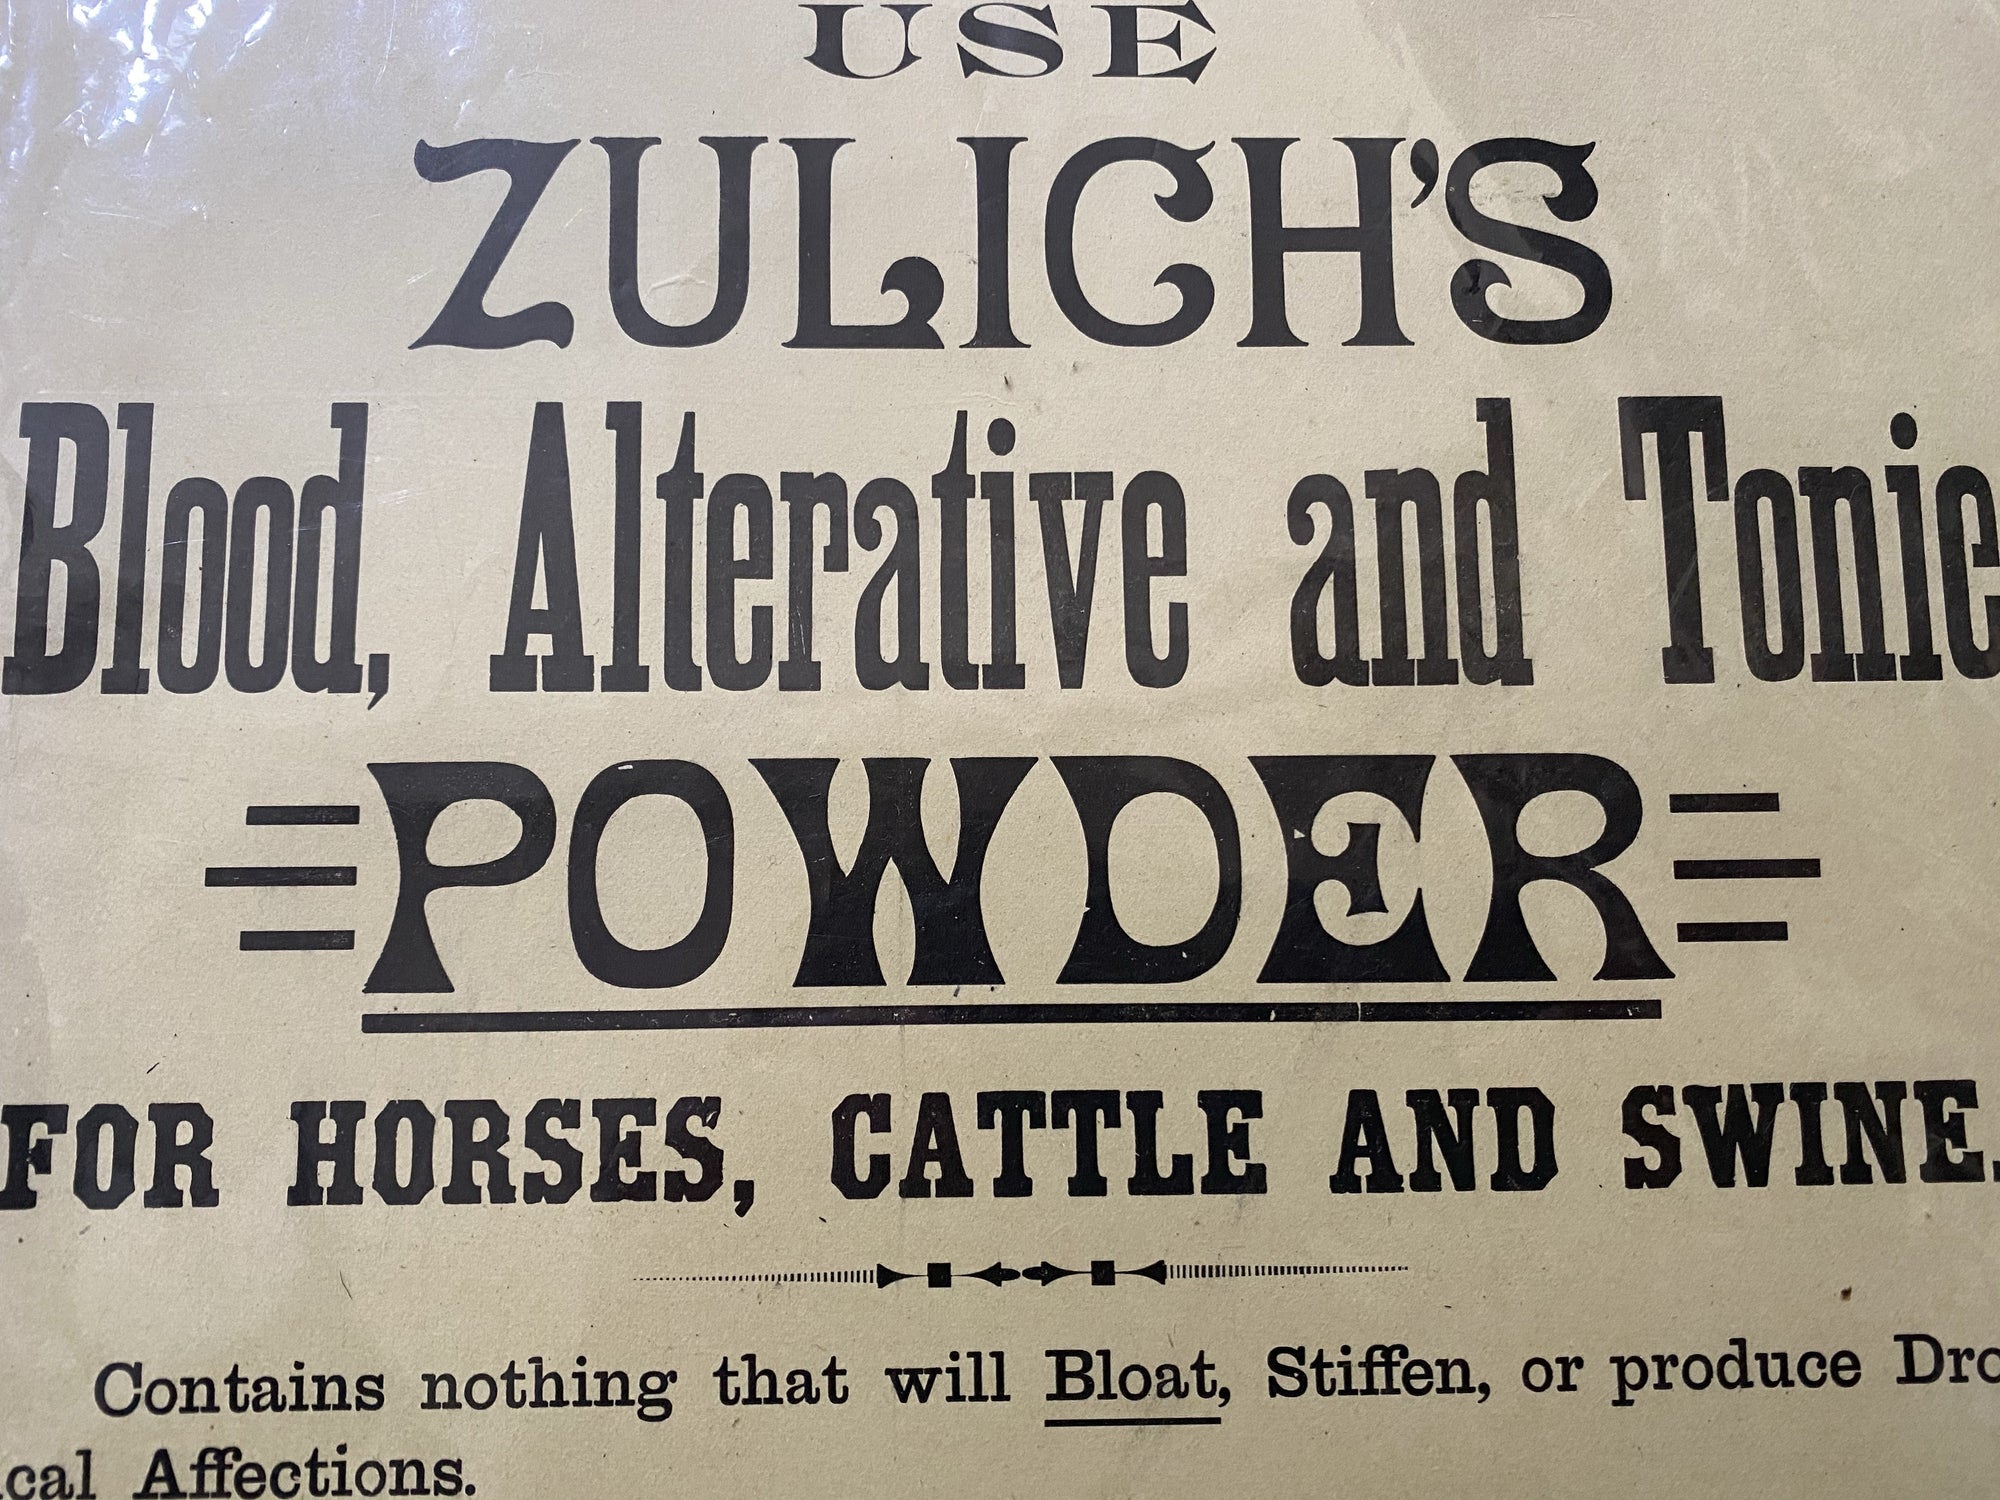 An original Zulich's Tonic store sign, in near mint condition, dating to 1890, from Philadelphia. Printed on heavy board, with a riveted hole at the top for hanging